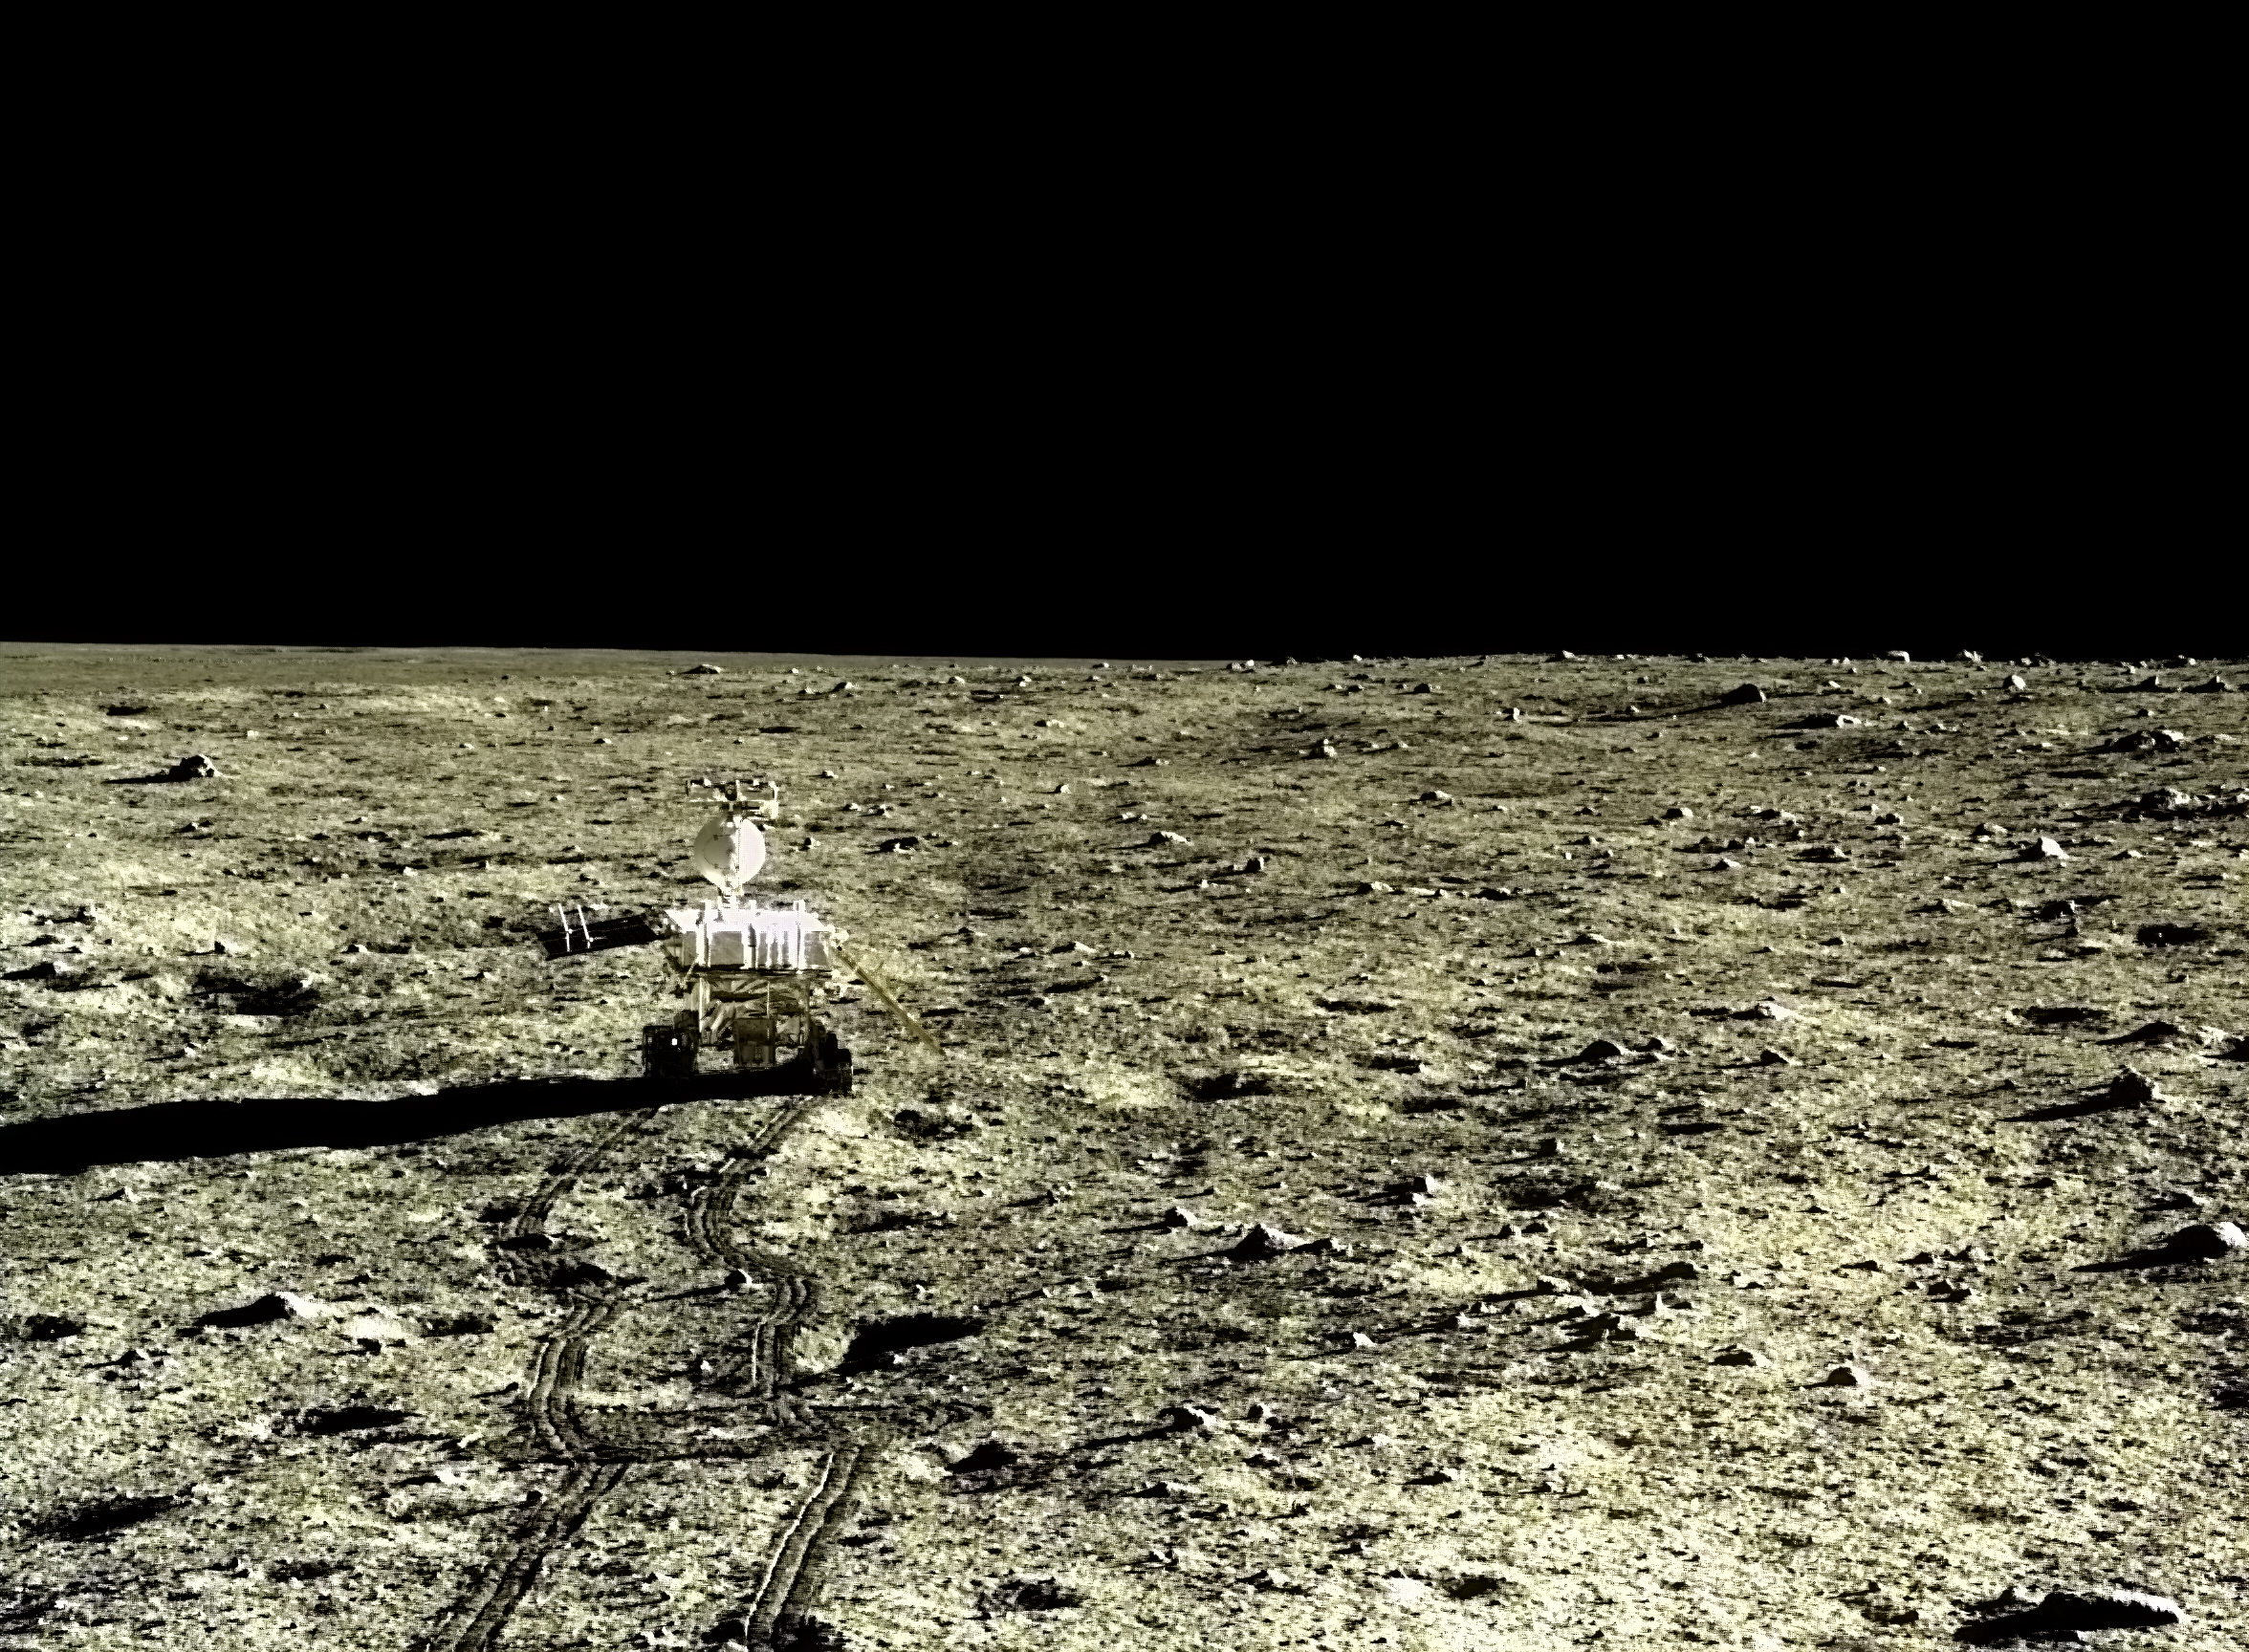 Chang'e 3 and Yutu images of the Moon